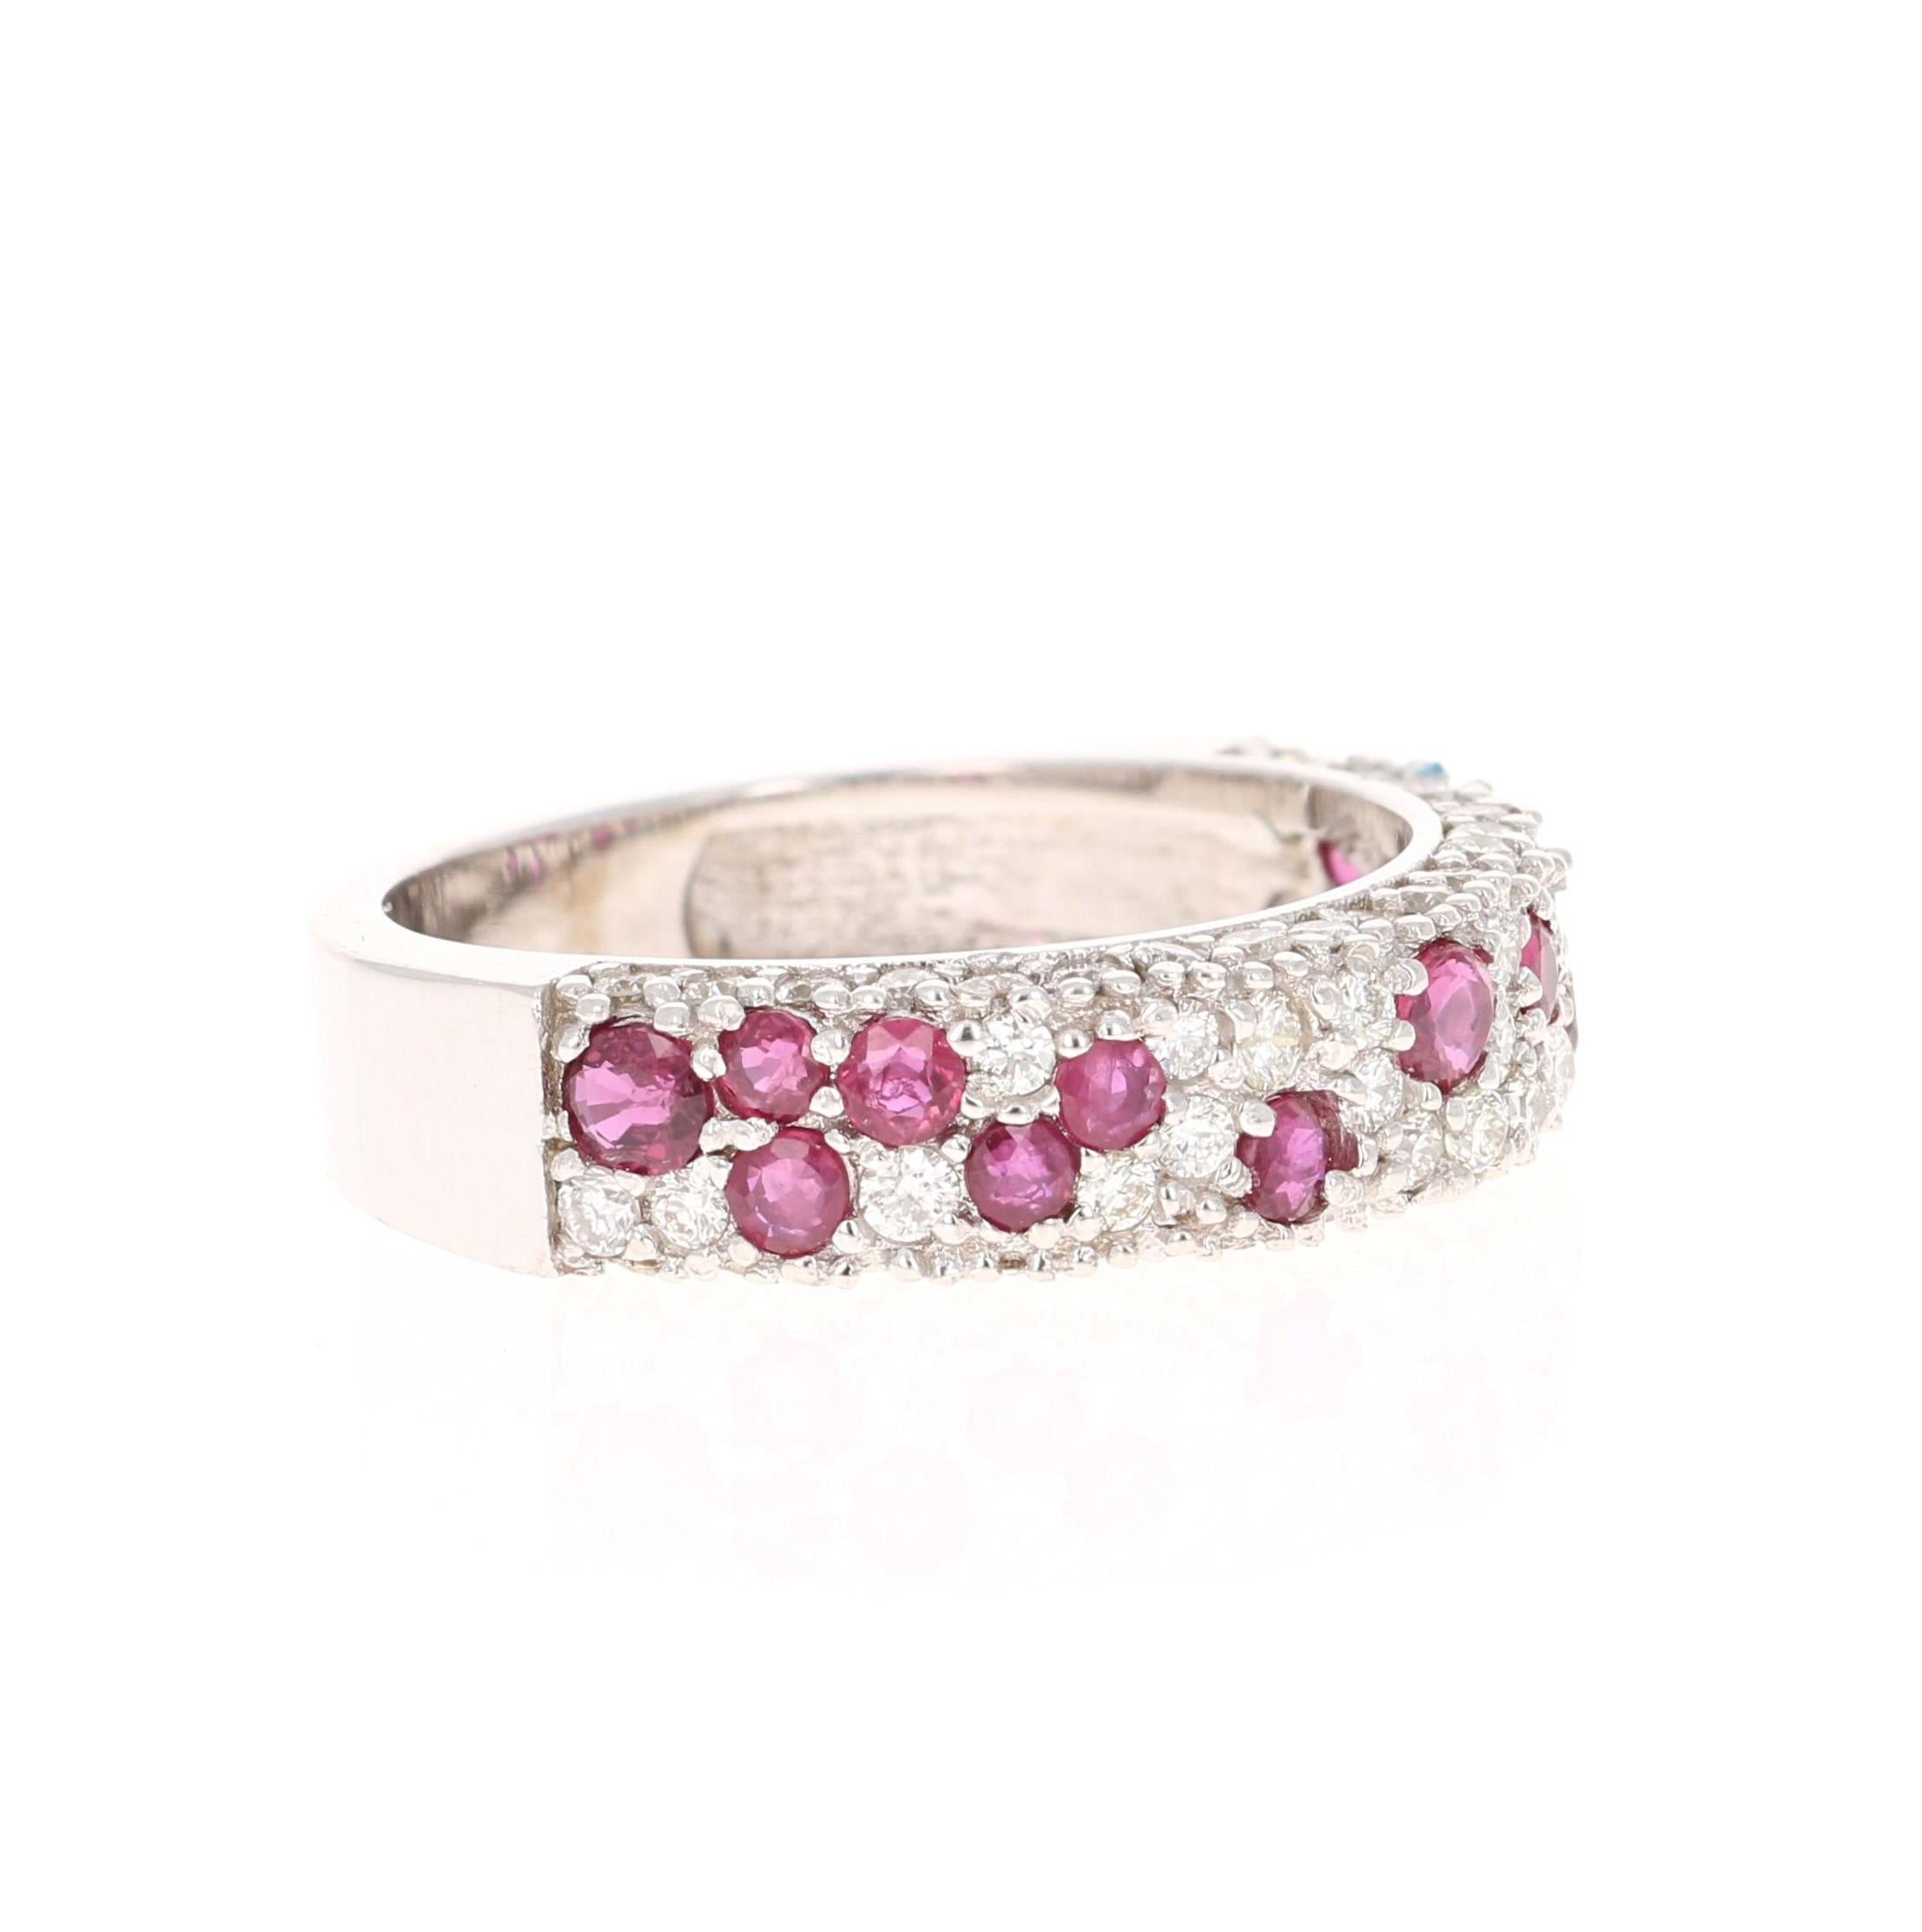 This gorgeous band has 13 Natural Round Cut Rubies that weigh 0.67 carats and 61 Round Cut Diamonds that weigh 0.76 carats. (Clarity: VS, Color: H) The total carat weight of the ring is 1.43 carats. 

The ring is designed in 18 Karat White Gold and